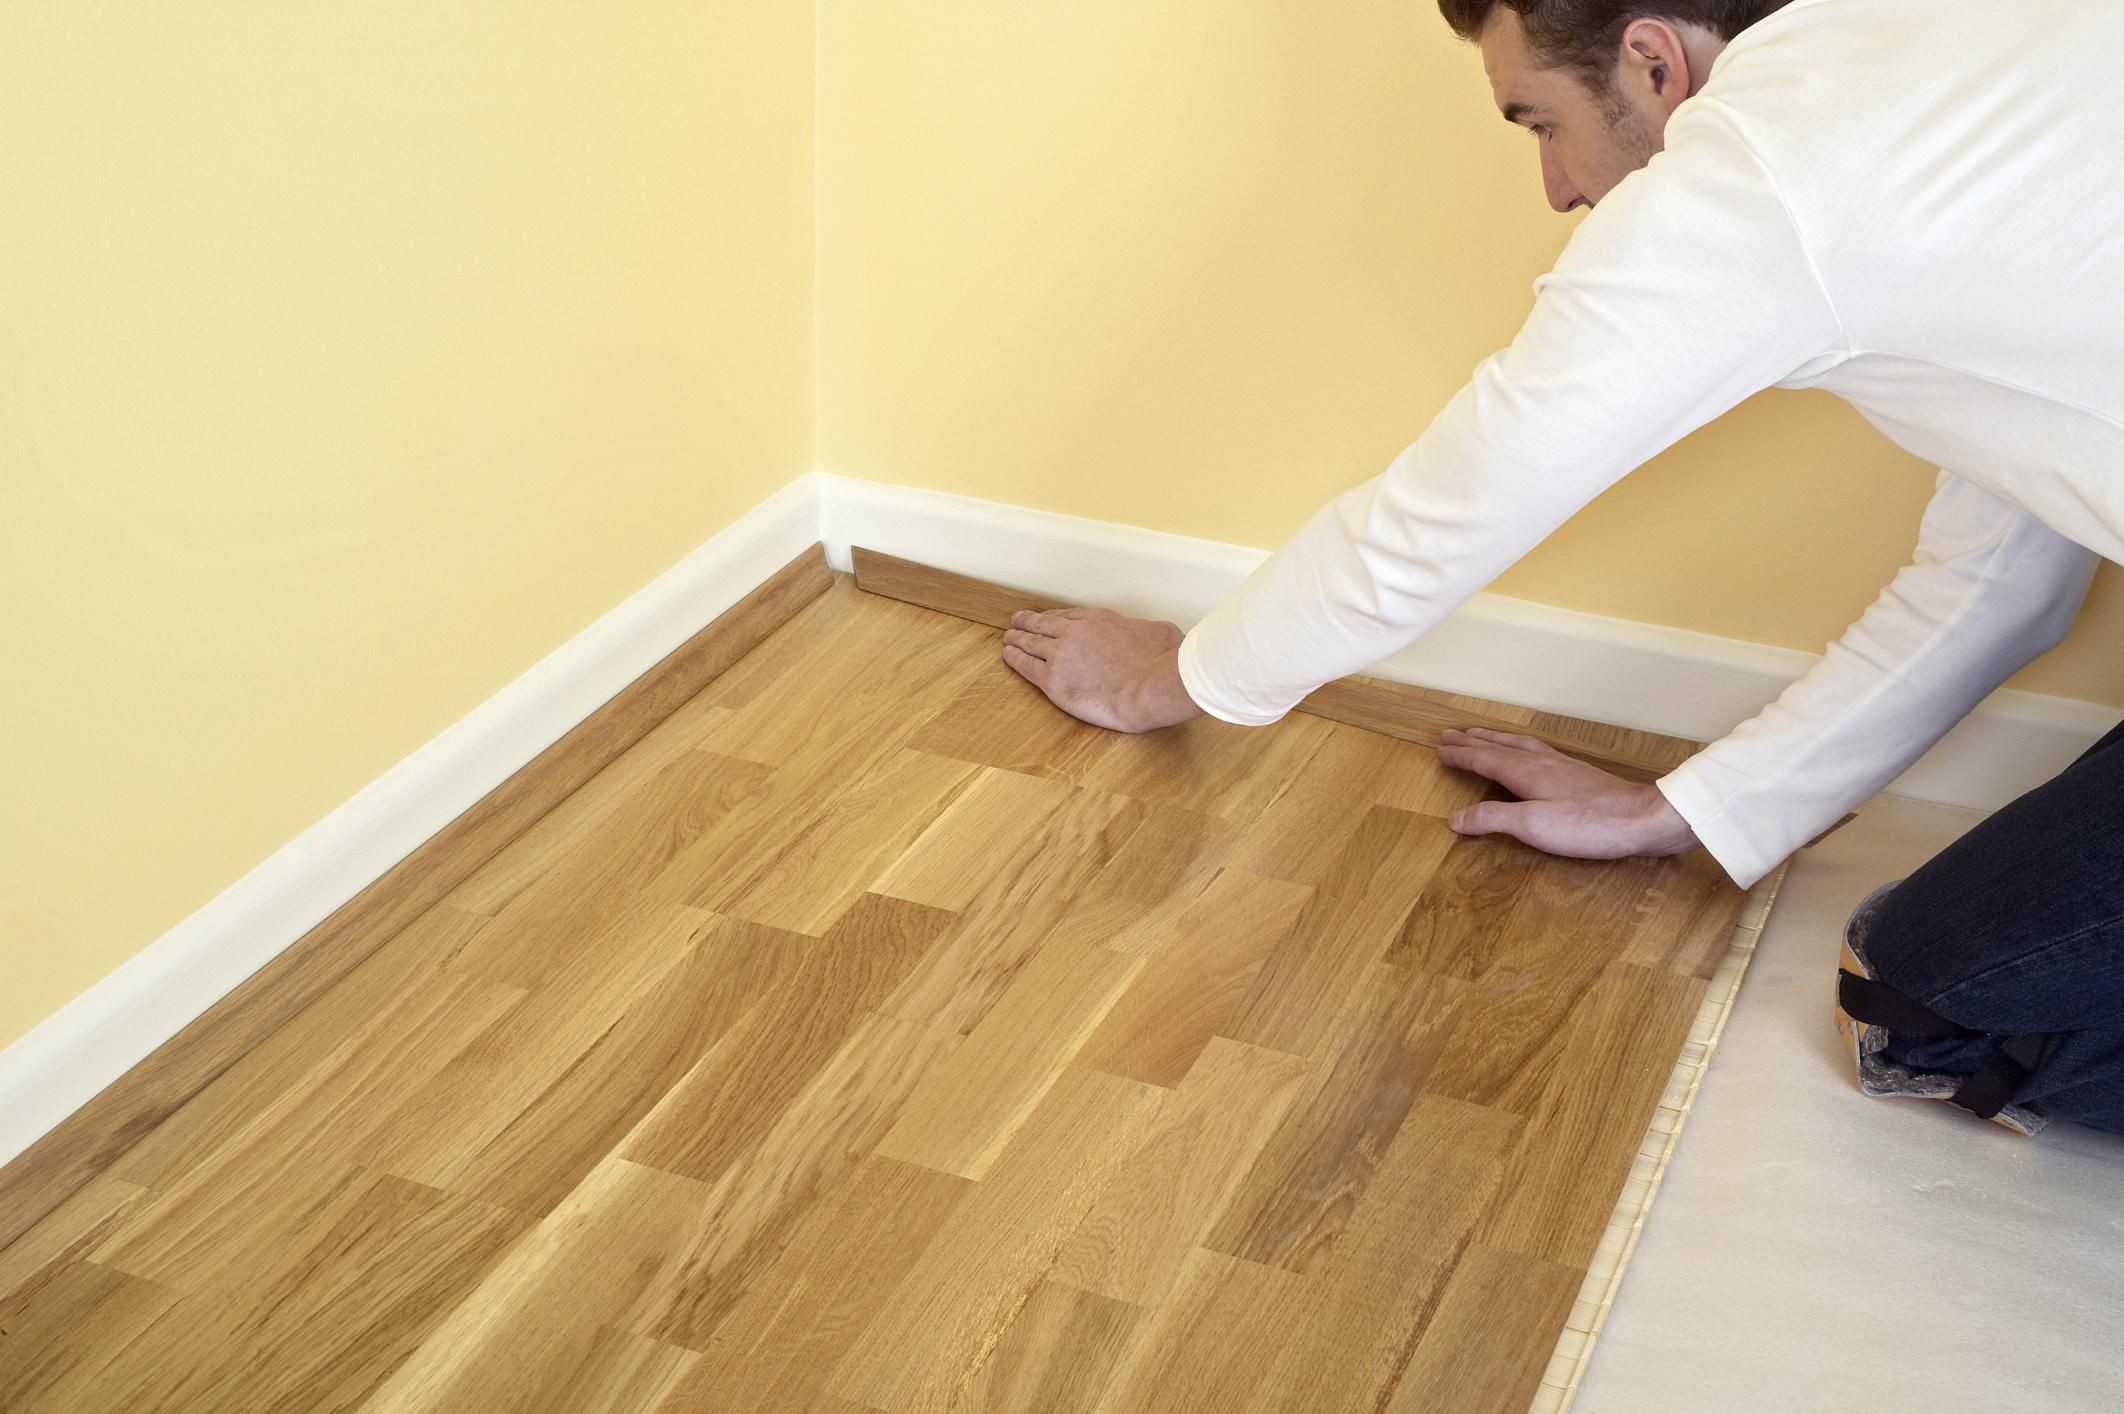 18 Nice Hardwood Floor Refinishing Waterville Me 2024 free download hardwood floor refinishing waterville me of basics of 12 mm laminate flooring with 80033008 56a49f155f9b58b7d0d7e0be